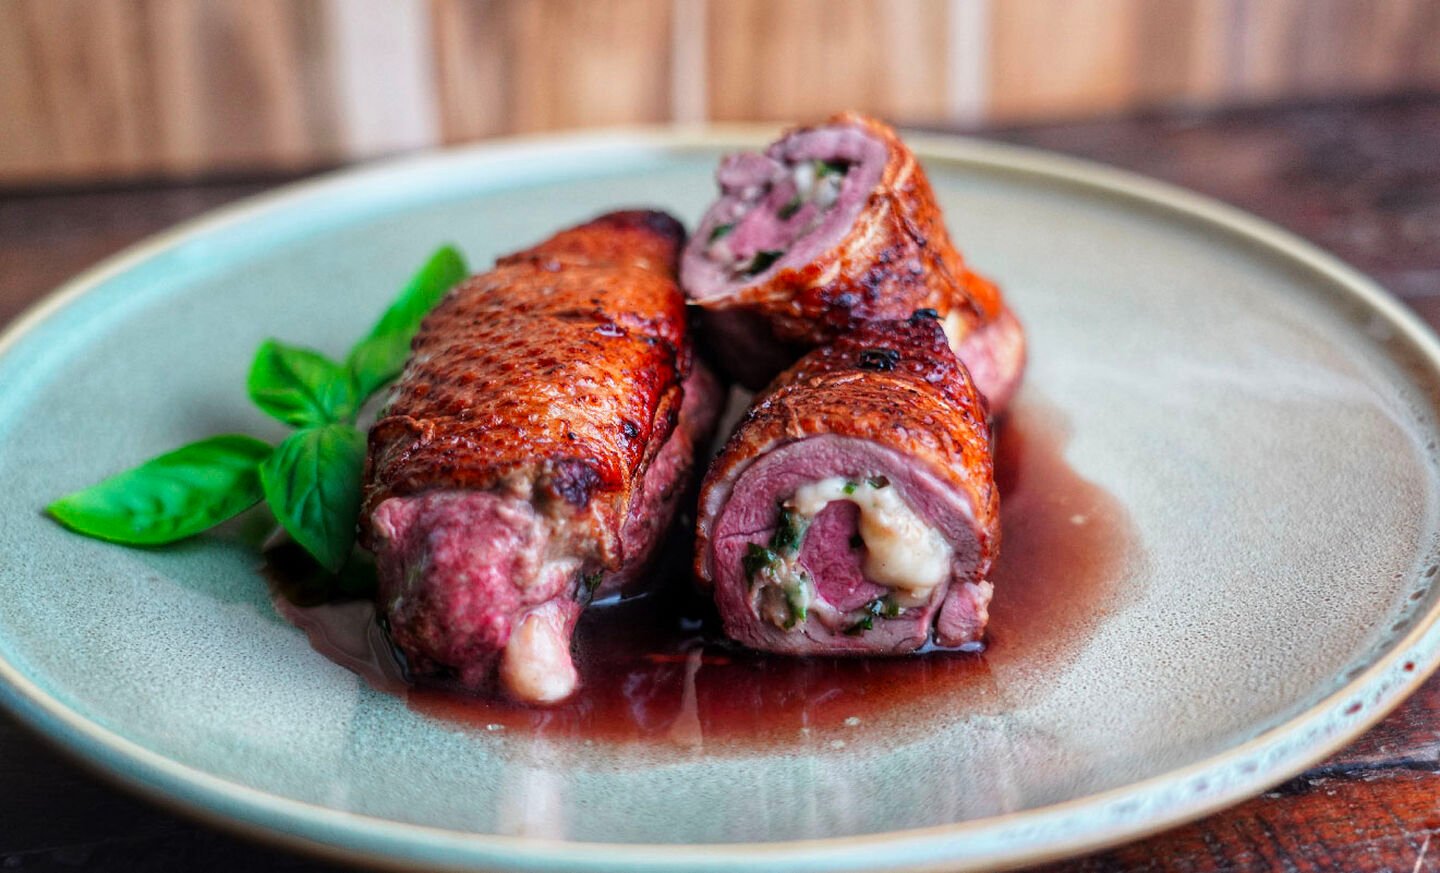 Muscovy Duck Roulade with Smoked Mozzarella and Roasted Garlic